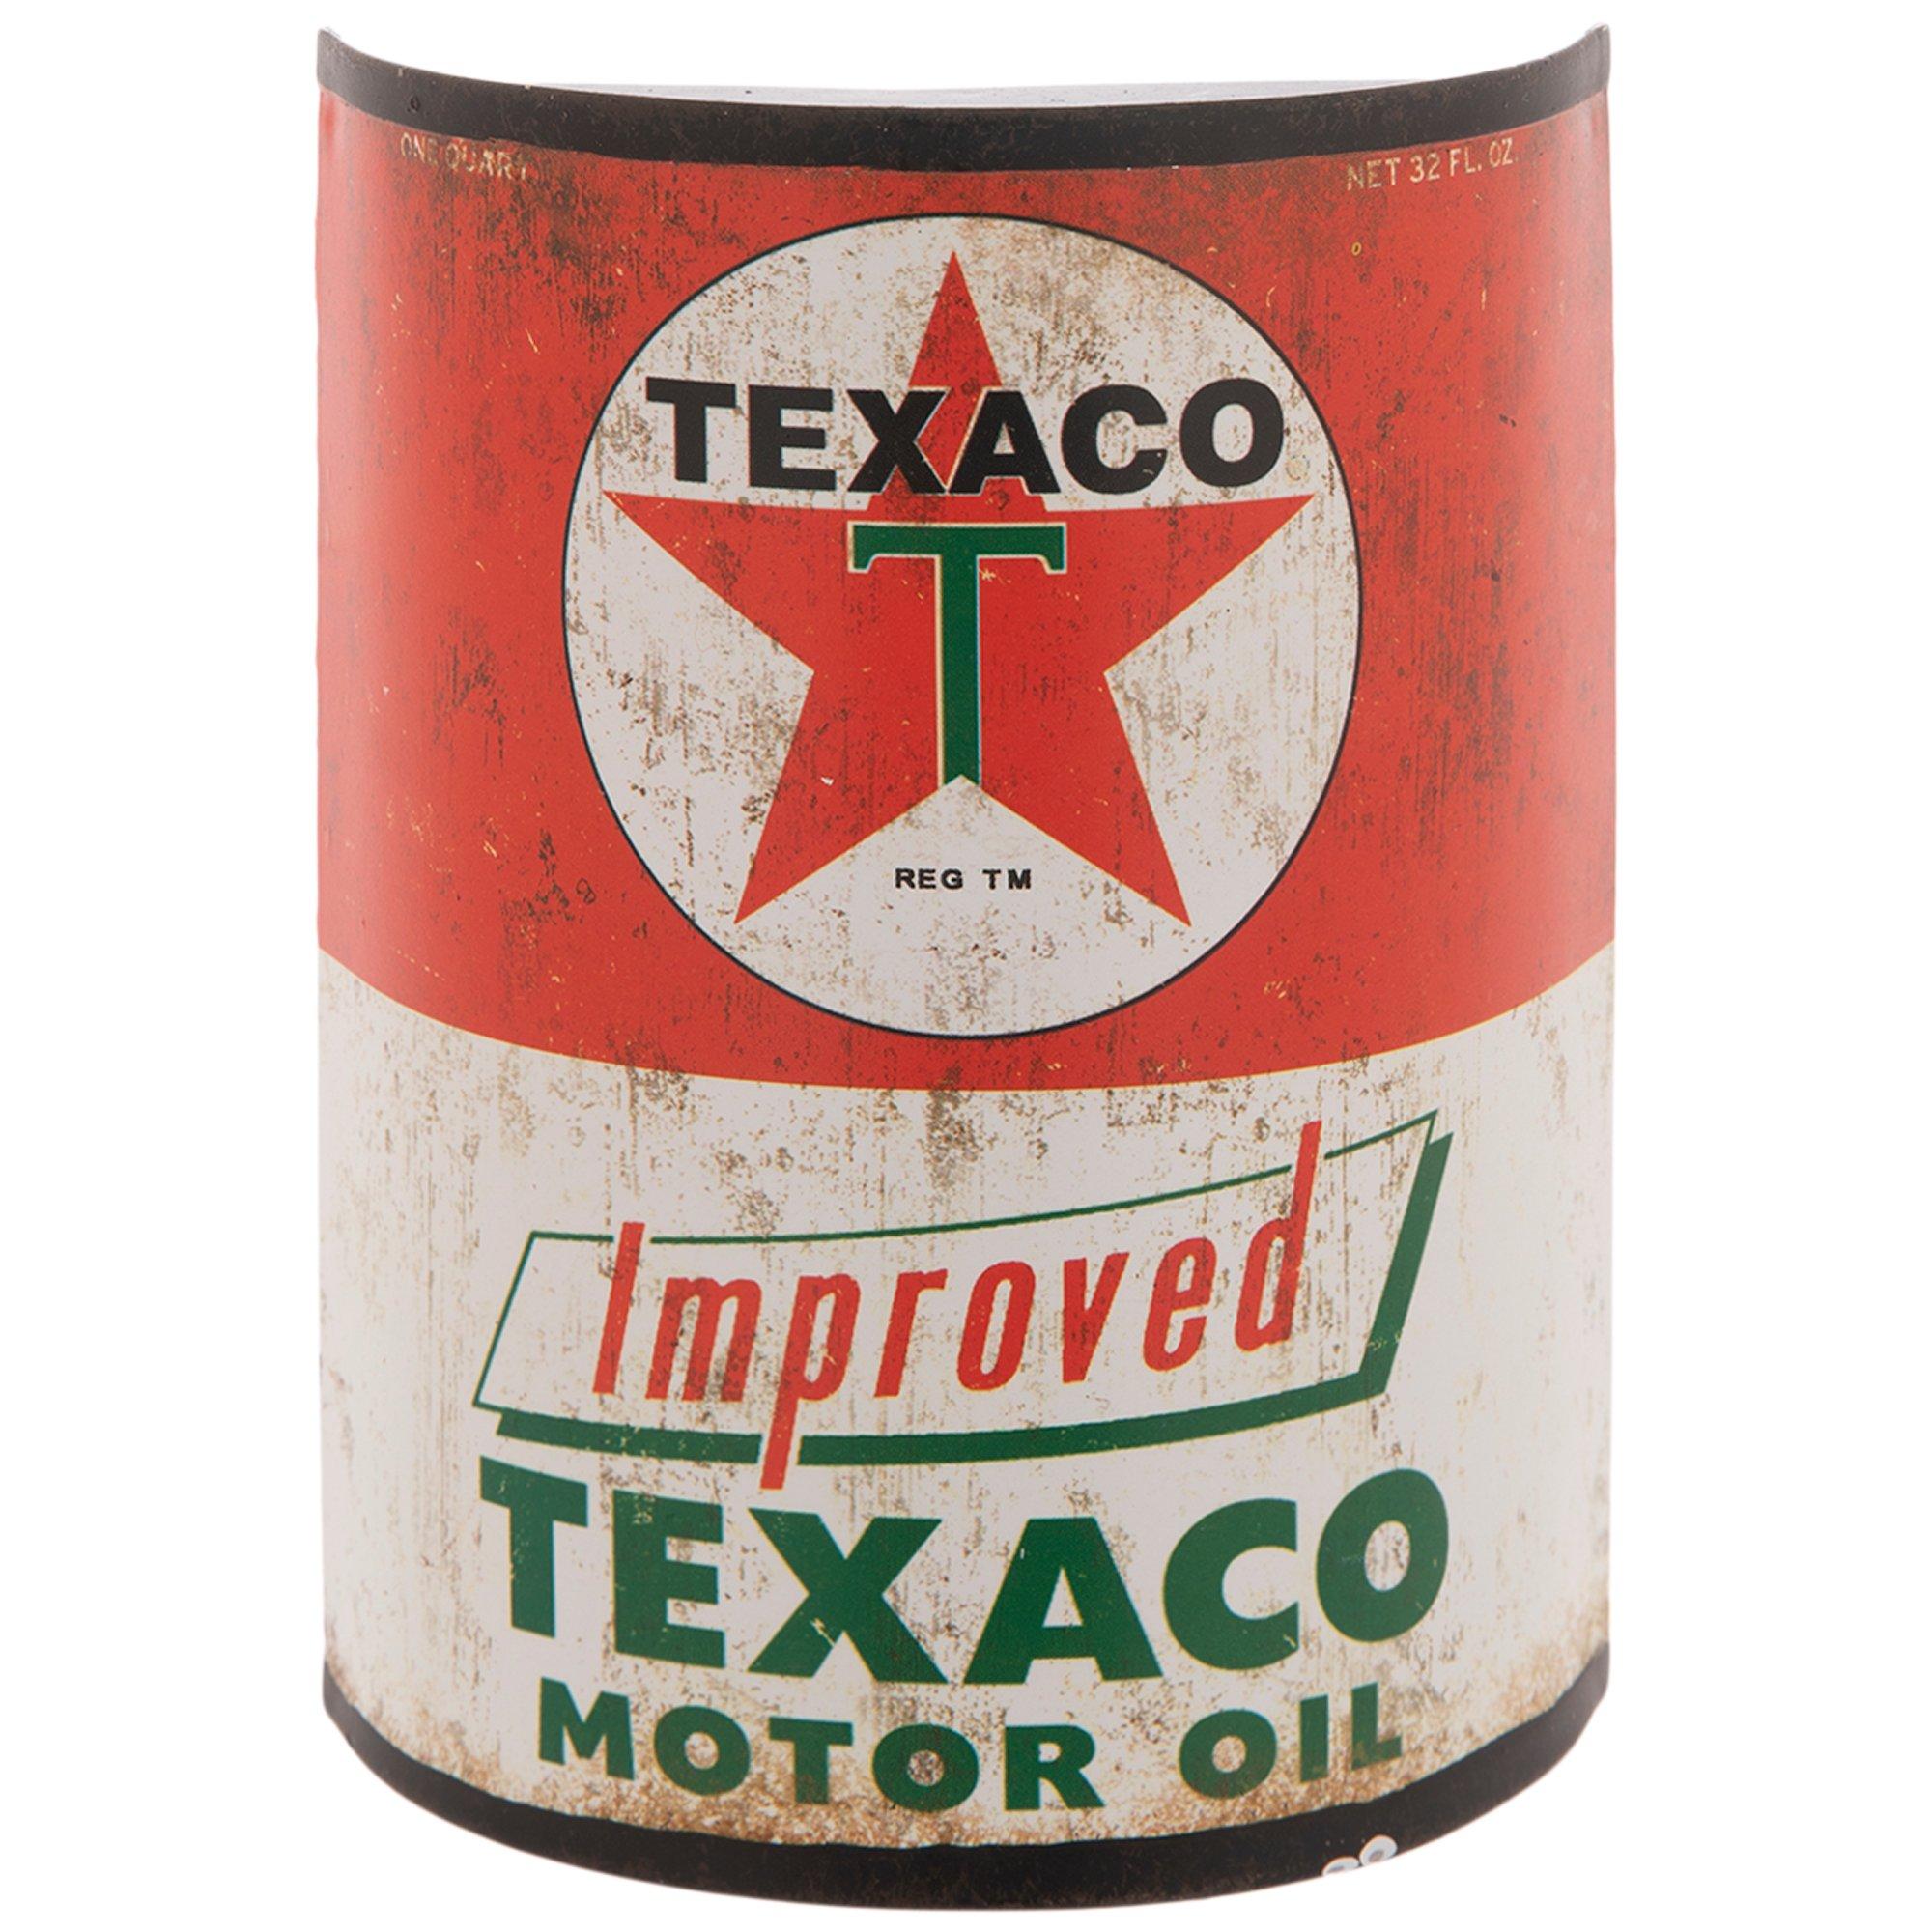 motor oil can